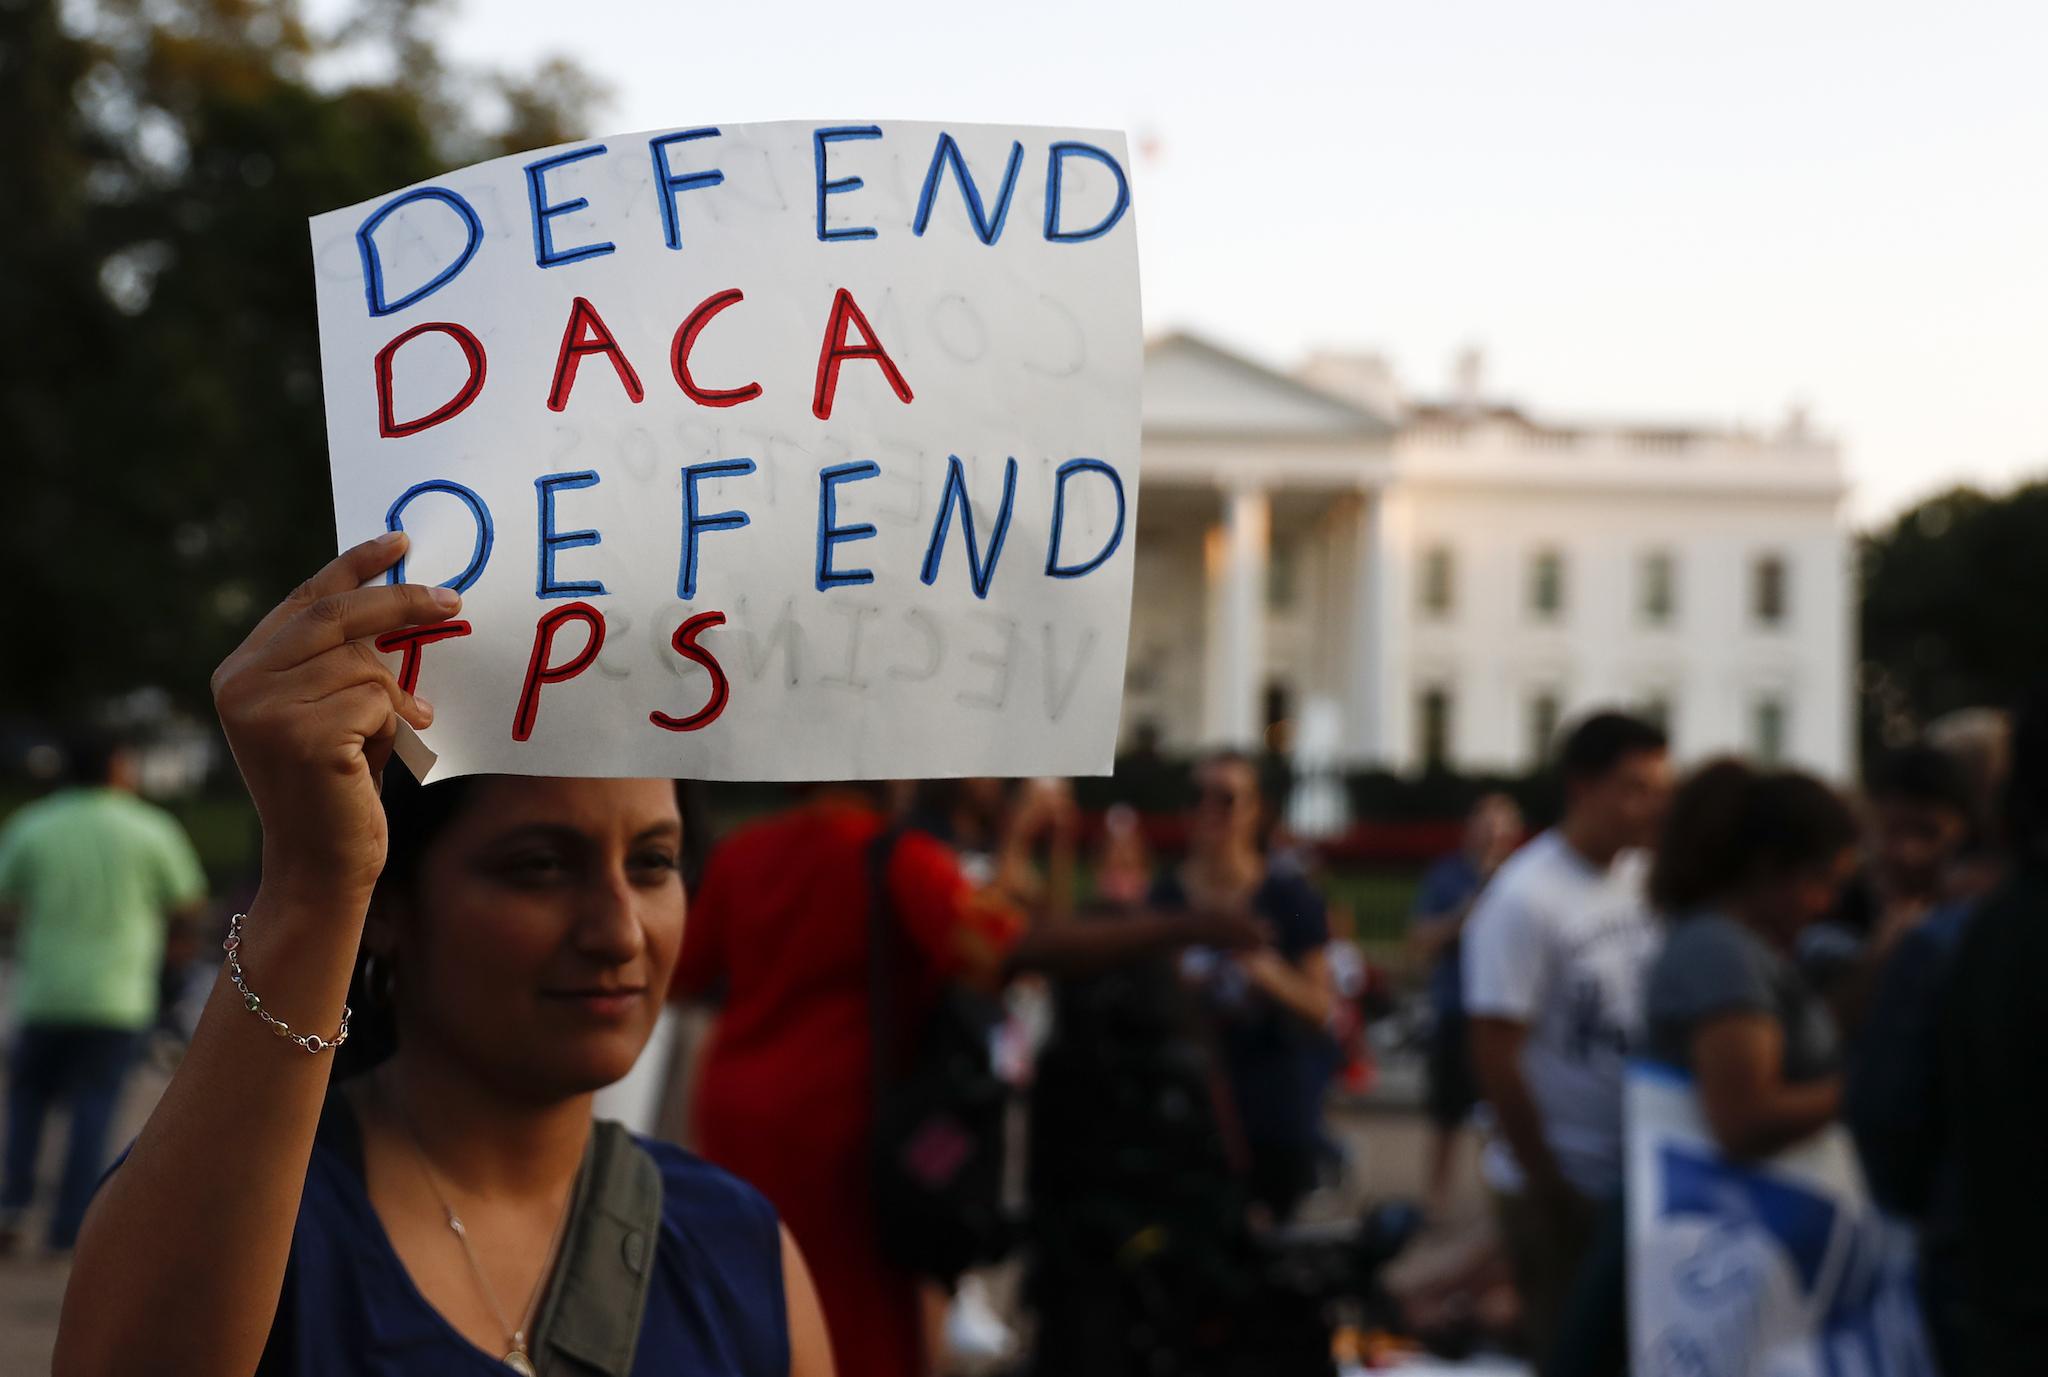 A woman holds up a sign that reads "Defend DACA Defend TPS" during a rally supporting Deferred Action for Childhood Arrivals, or DACA, outside the White House